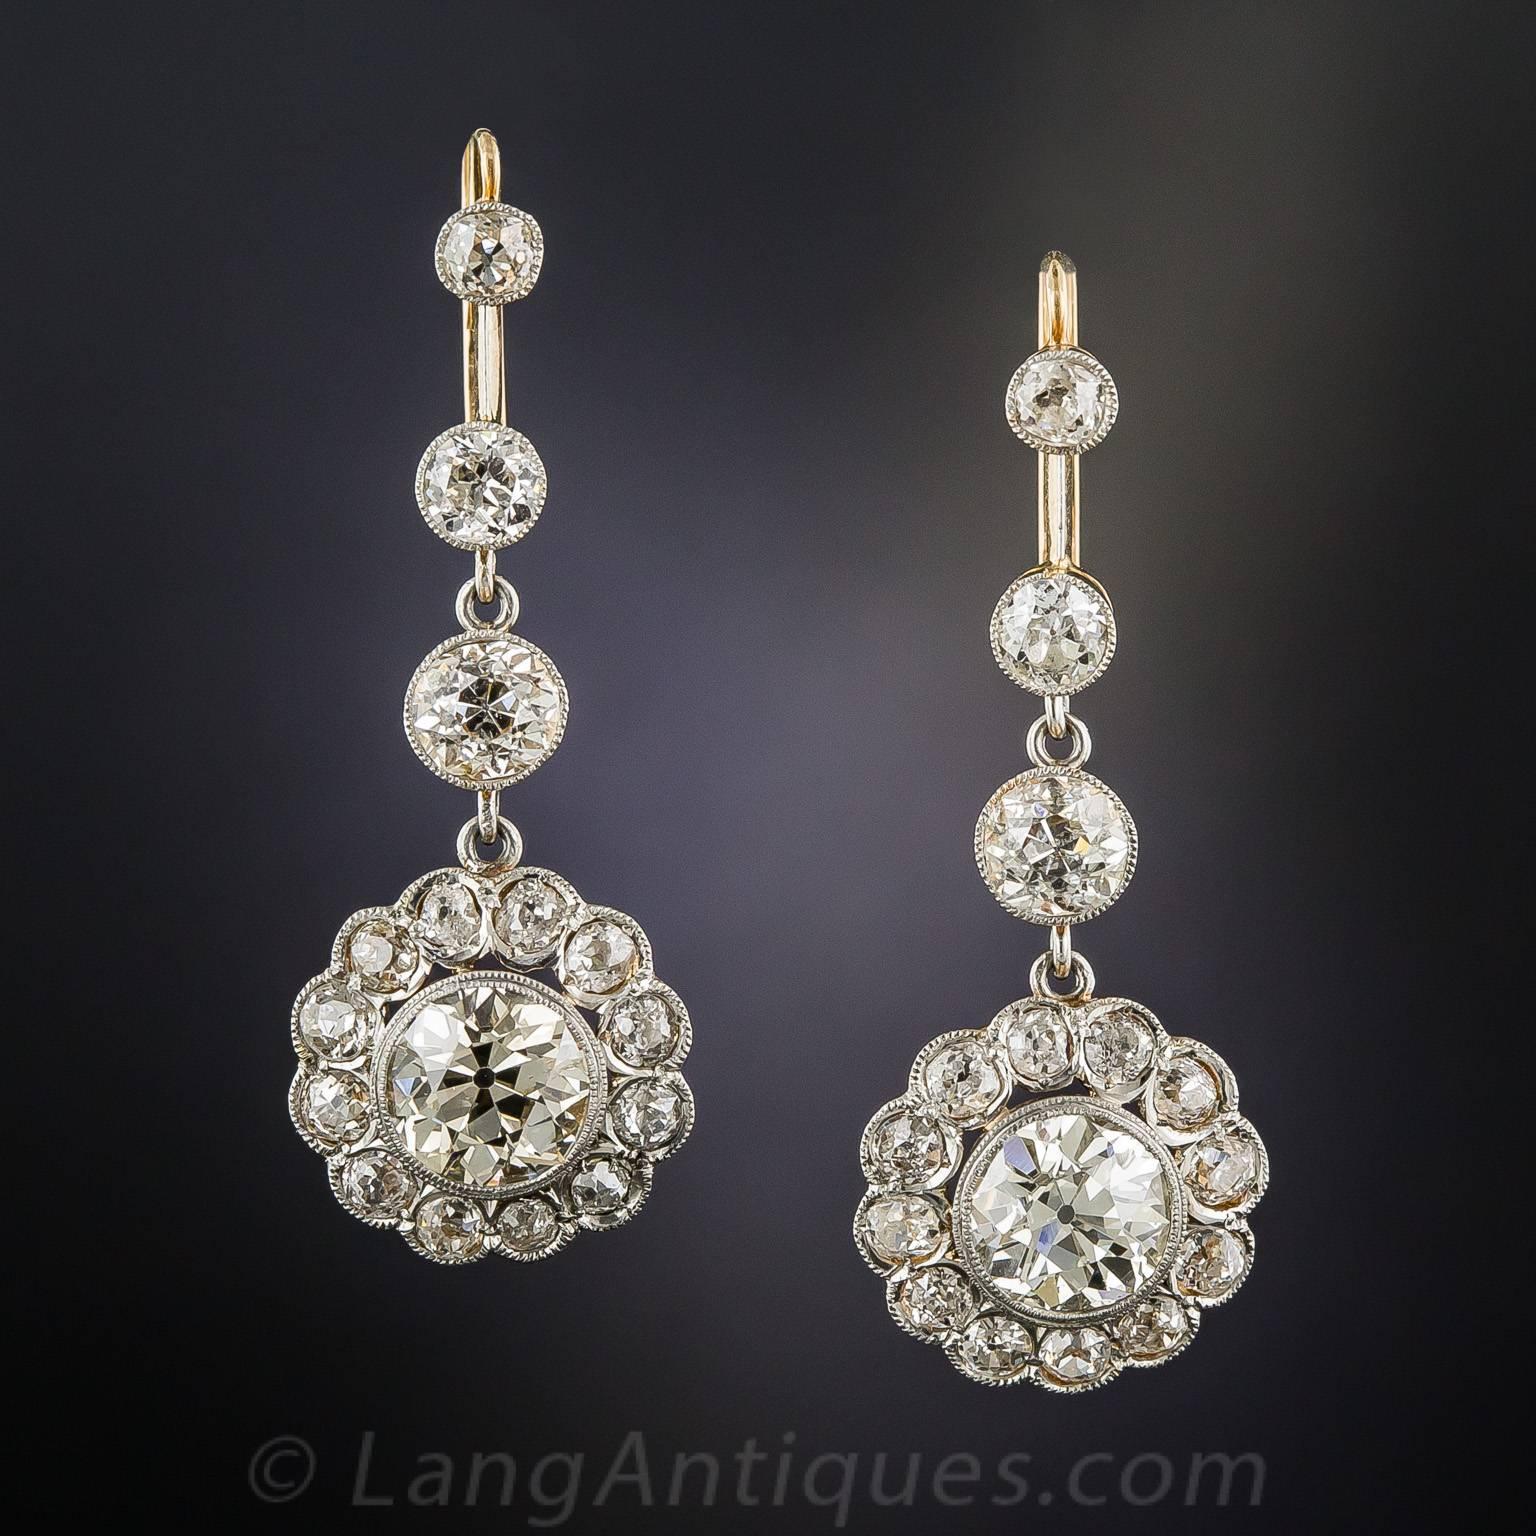 Swinging ultra-sparklers! Dating back to the early-1920s, these fabulous 1 1/2 inch long and lustrous diamond drops radiate front and center with a matched pair of gorgeous European-cut diamonds, together weighing 3.75 carats. The stones scintillate